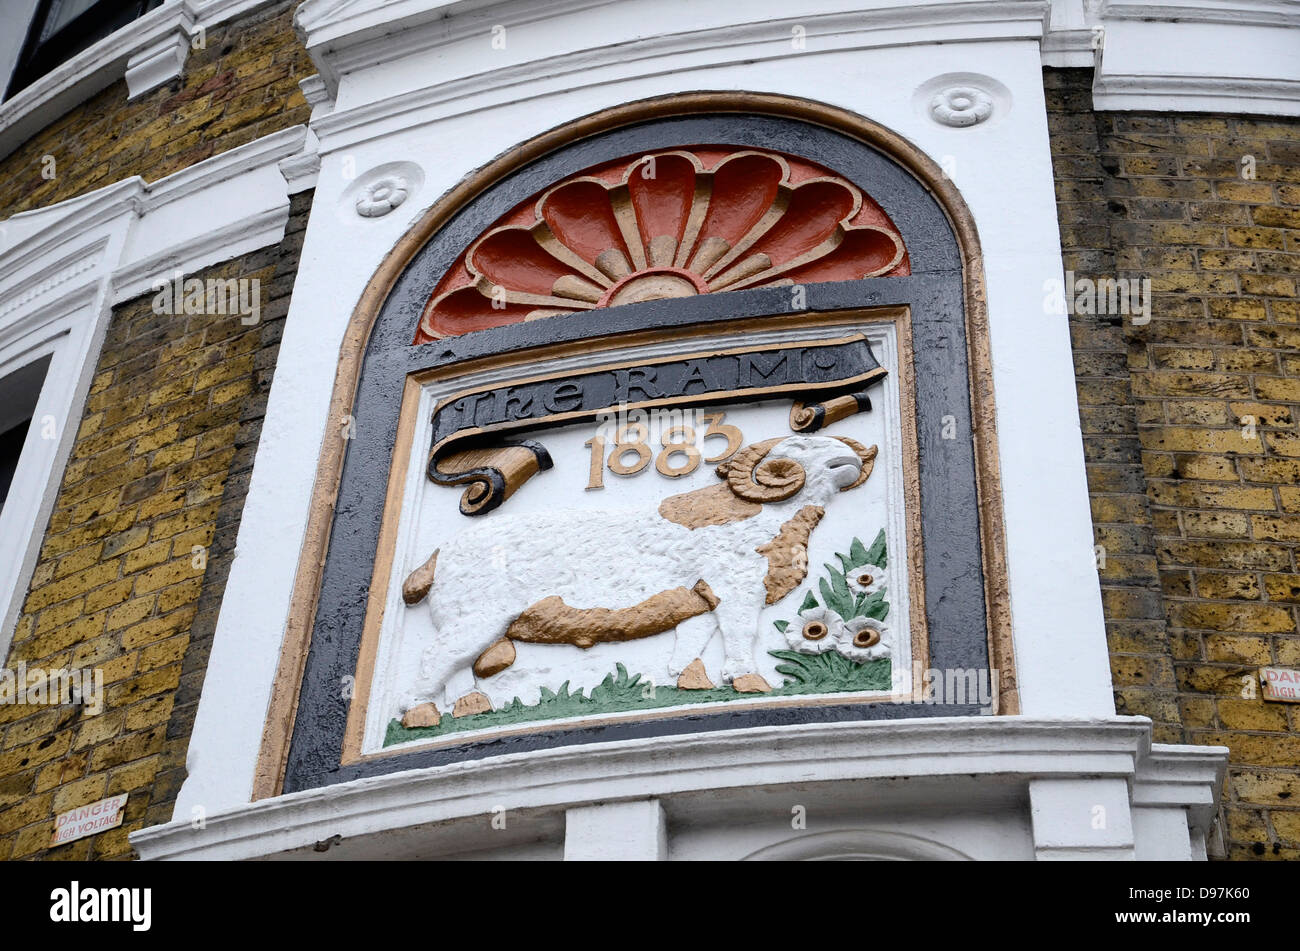 The now disused Young's Ram Inn Brewery Tap in Ram Street, Wandsworth, south London Stock Photo